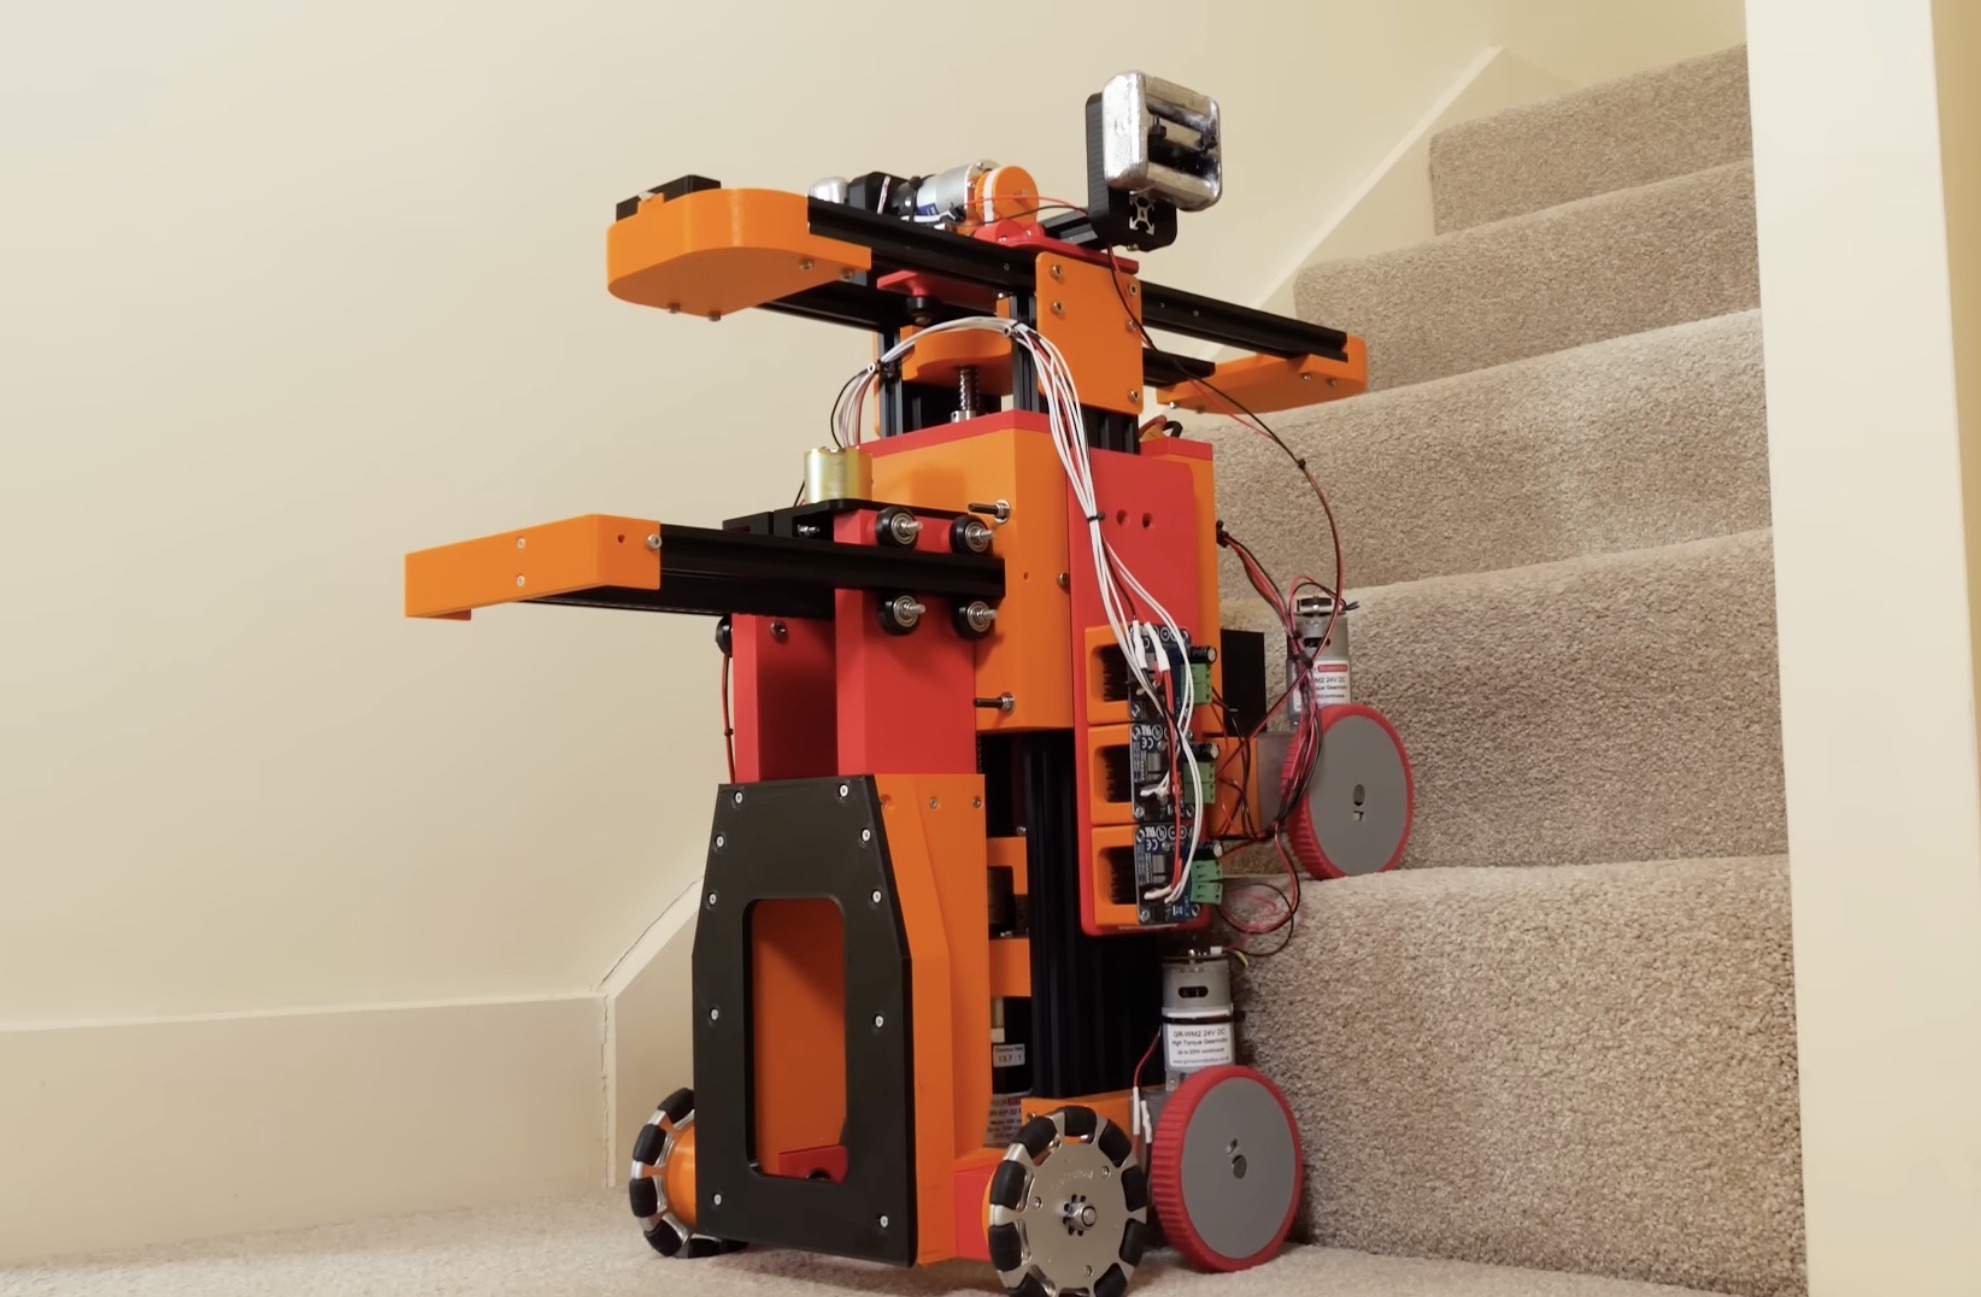 James Bruton’s latest robotic climbs stairs